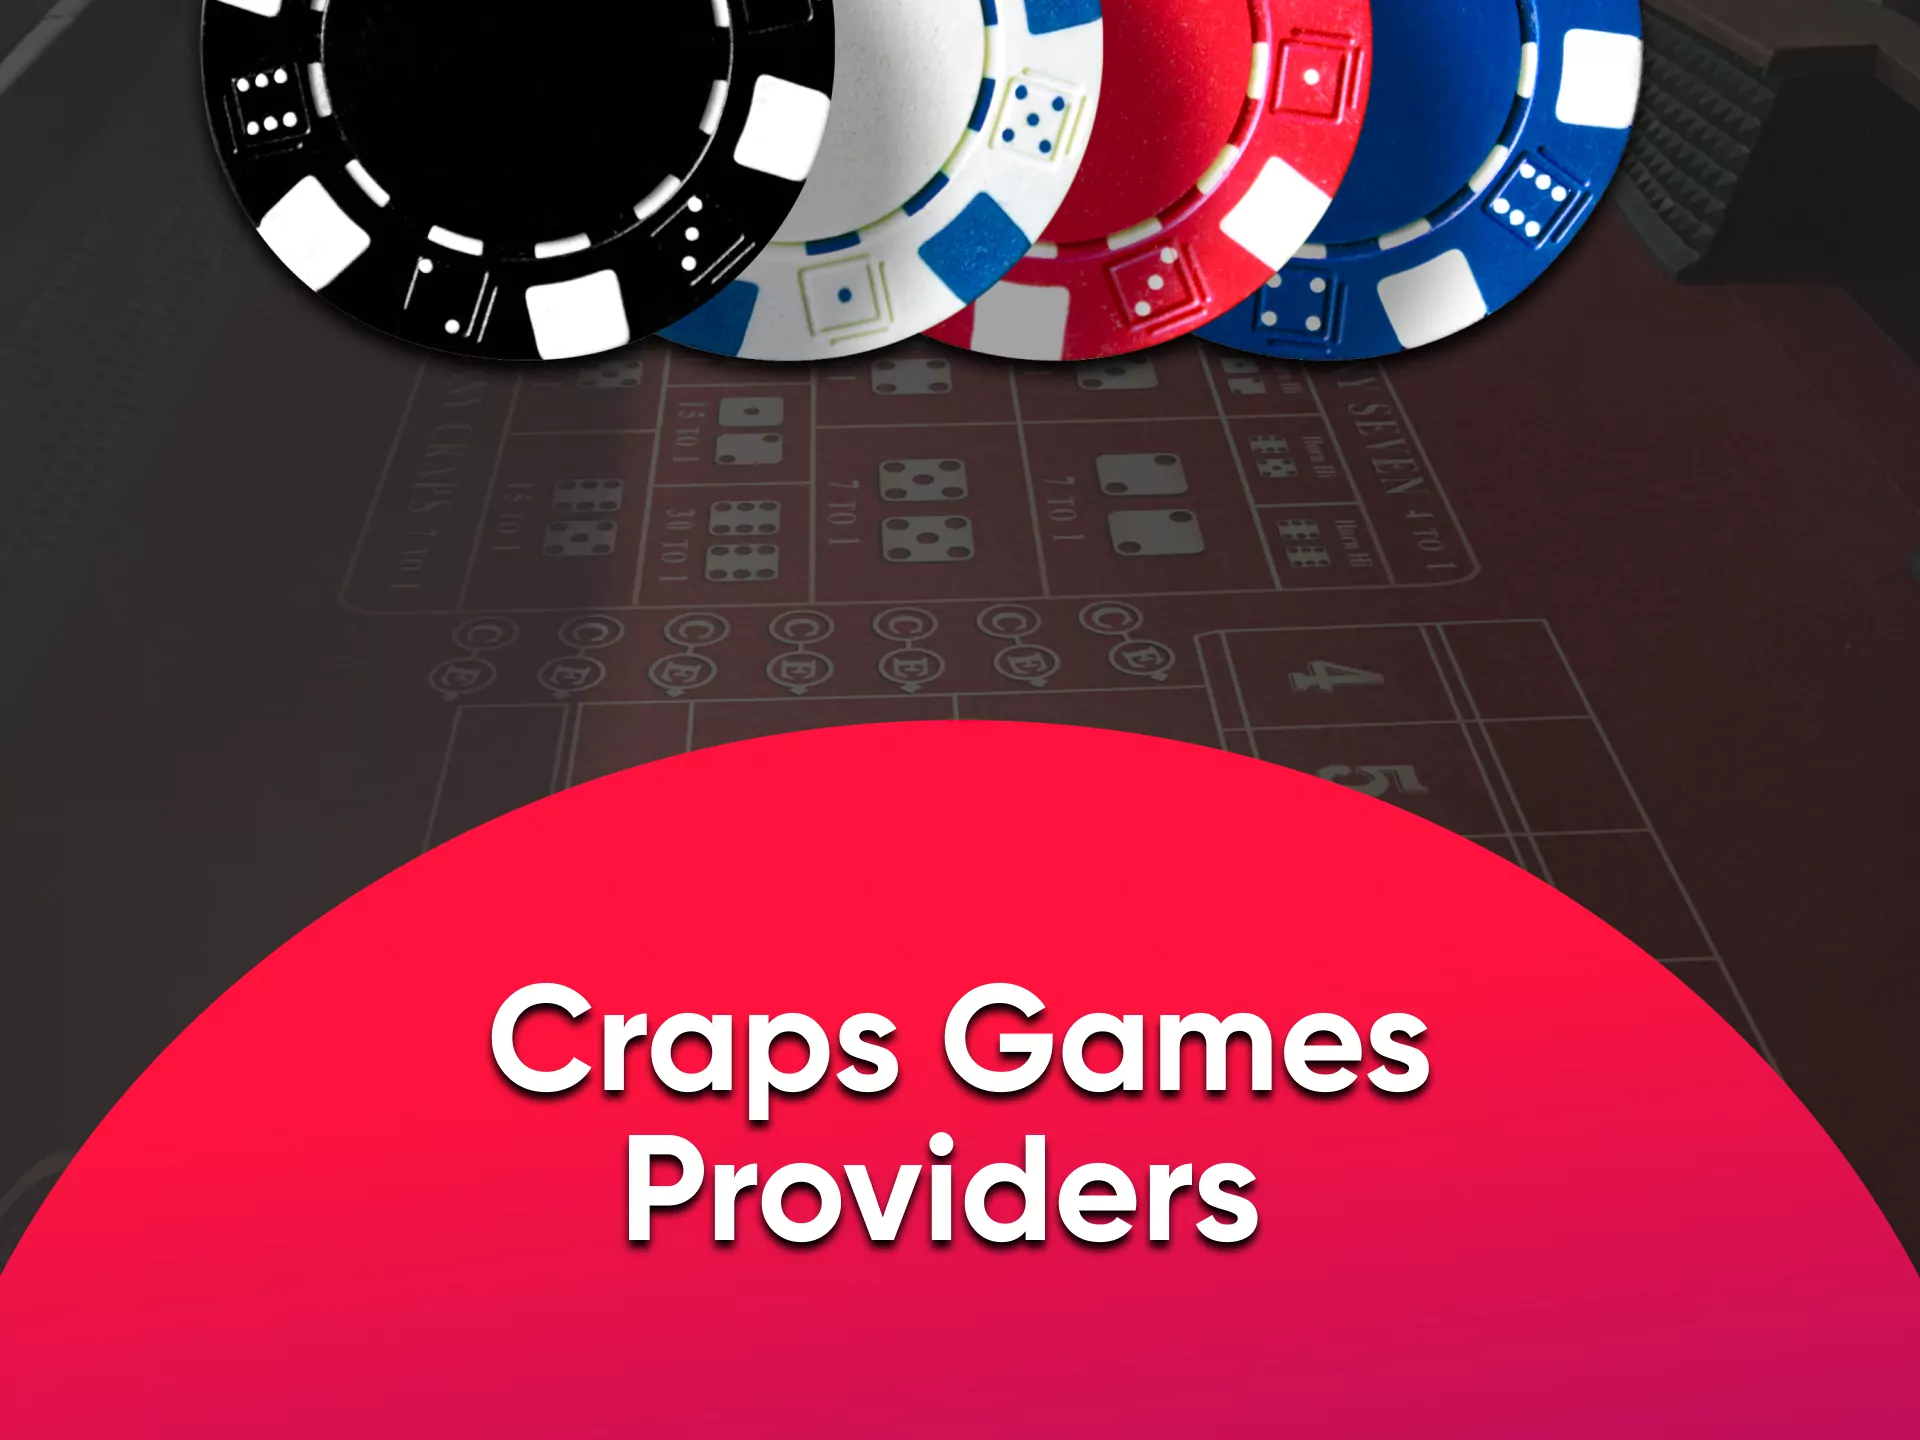 Play Craps from trusted sources.